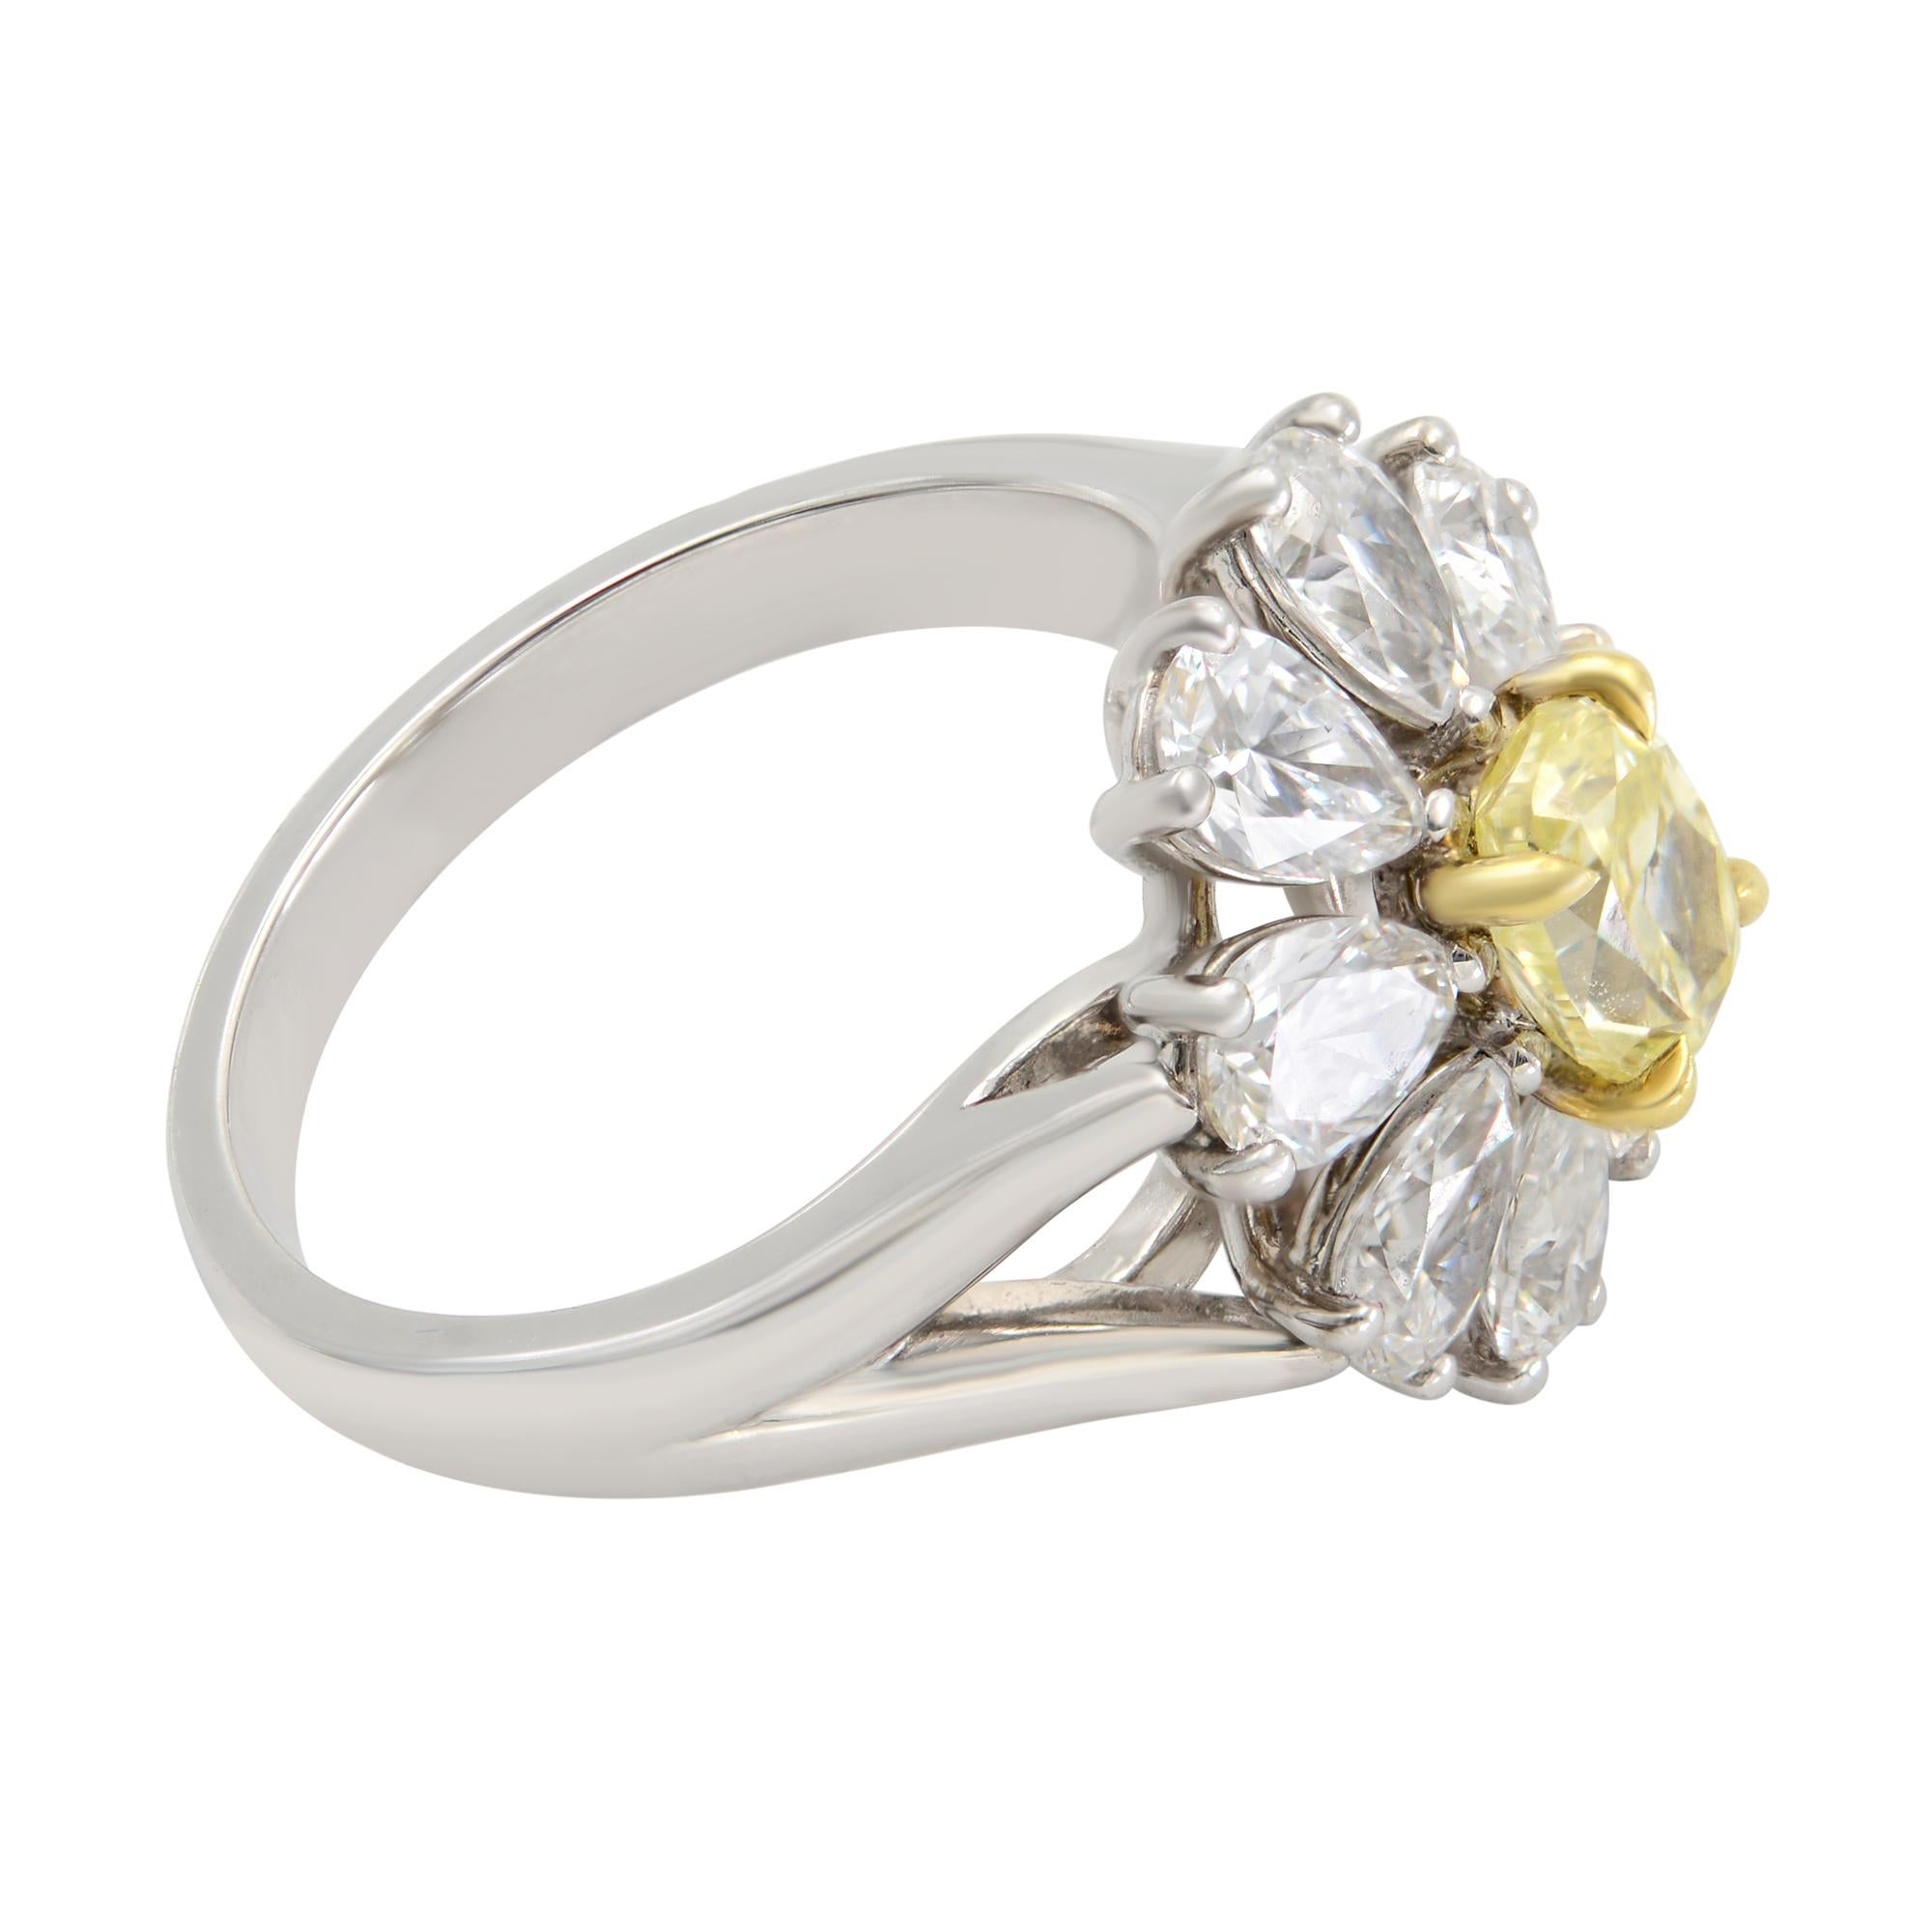 A beautiful classic cocktail ring with 0.80 carat Fancy Yellow Oval cut as a center stone surrounded with 8 pear shaped diamonds of 1.90 carat in a Halo design adorned in a filigree pattern compliments the Fancy yellow gem. This truly striking